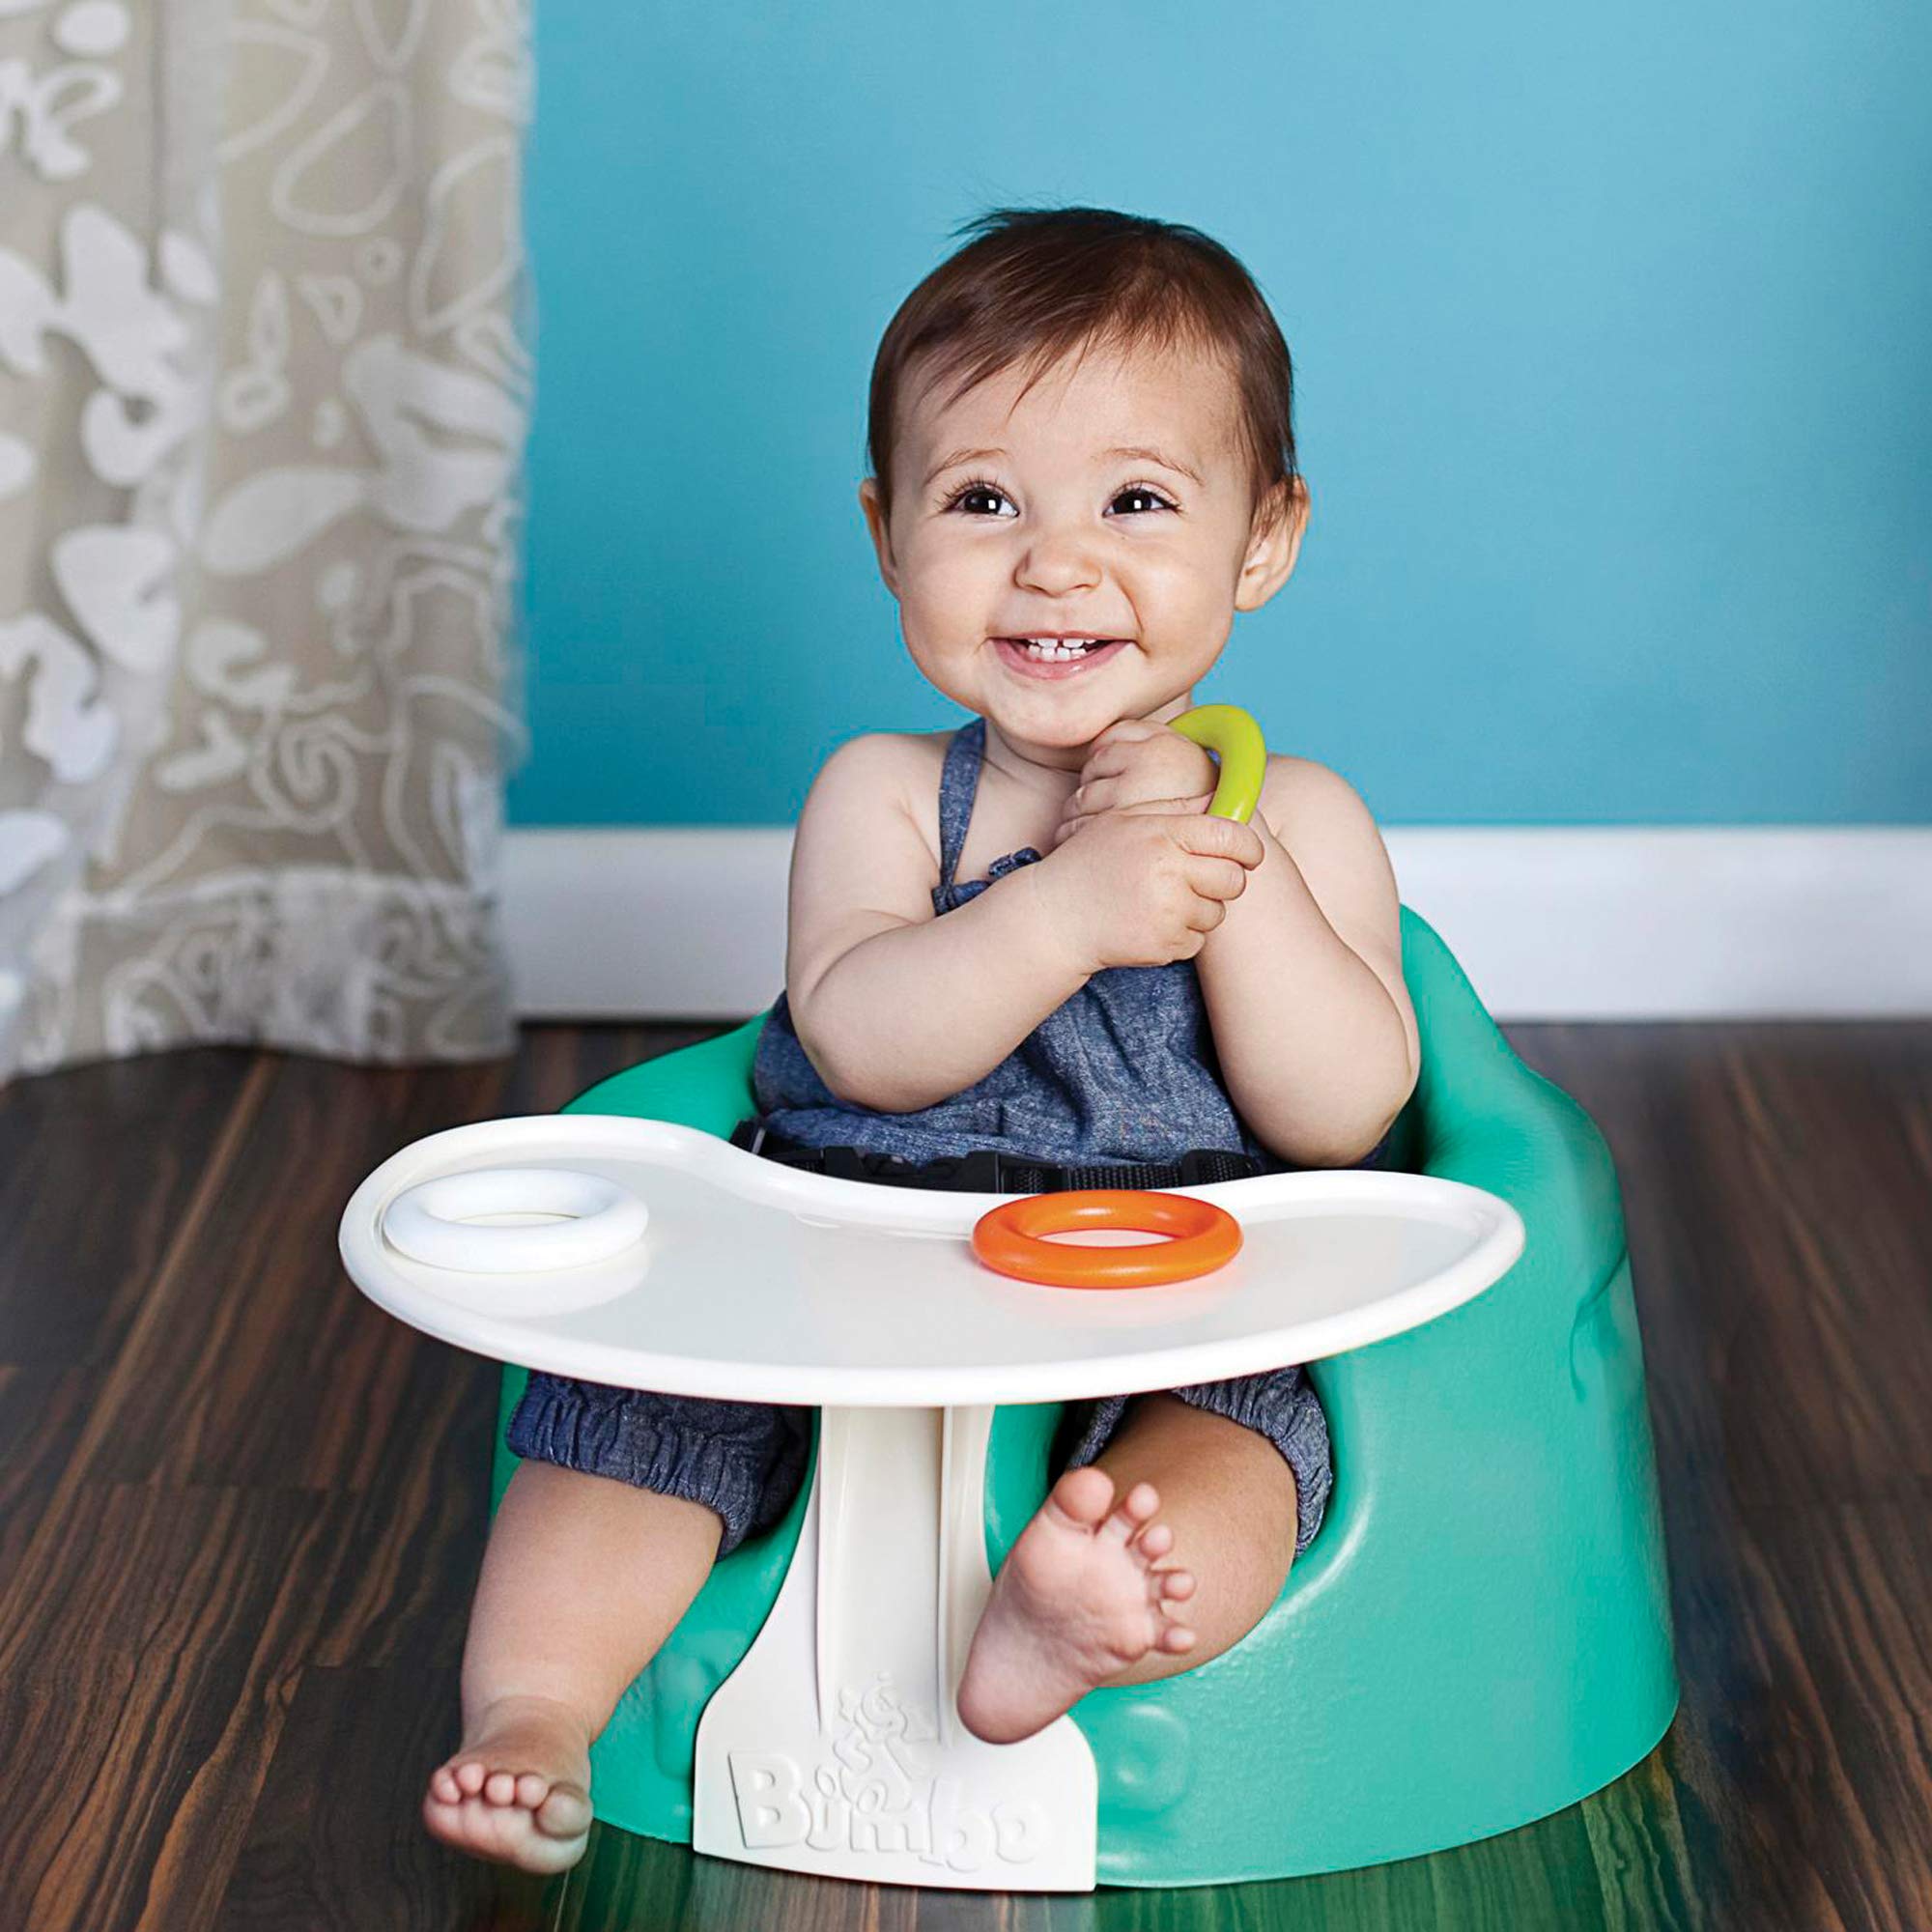 Bumbo Play Tray - Feeding Tray and Play Surface for Bumbo Floor Seat